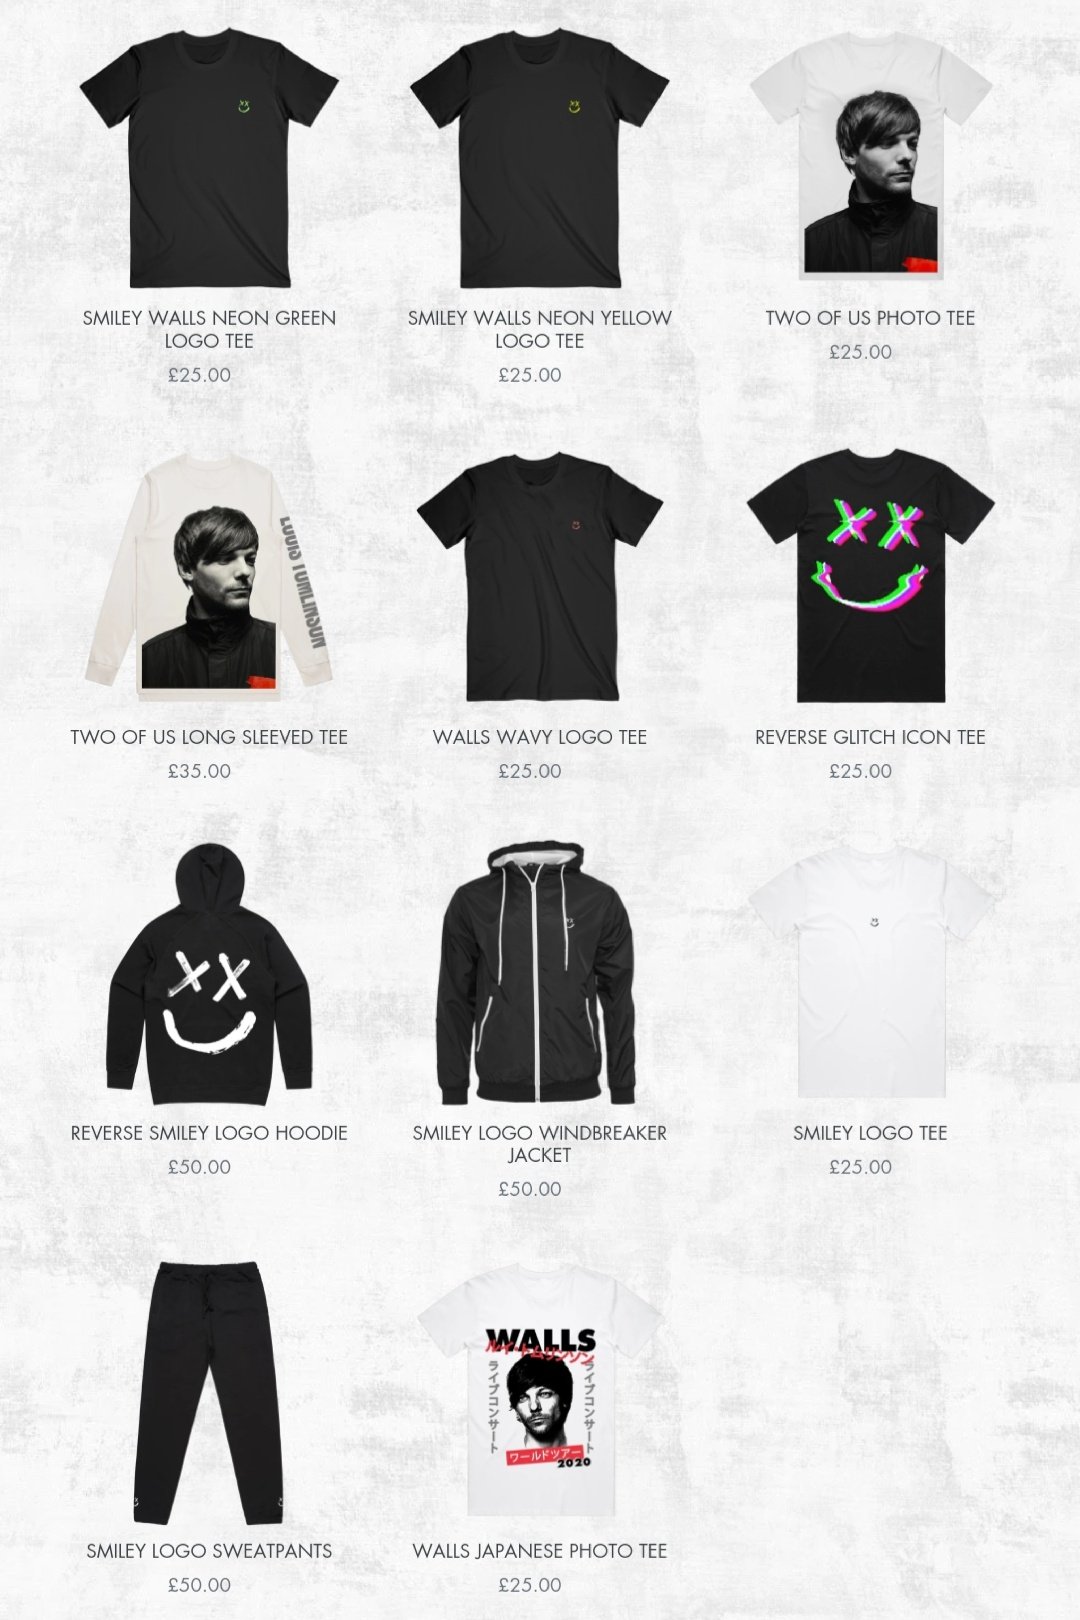 HL DAILY — Louis has added some merch to his website! (3